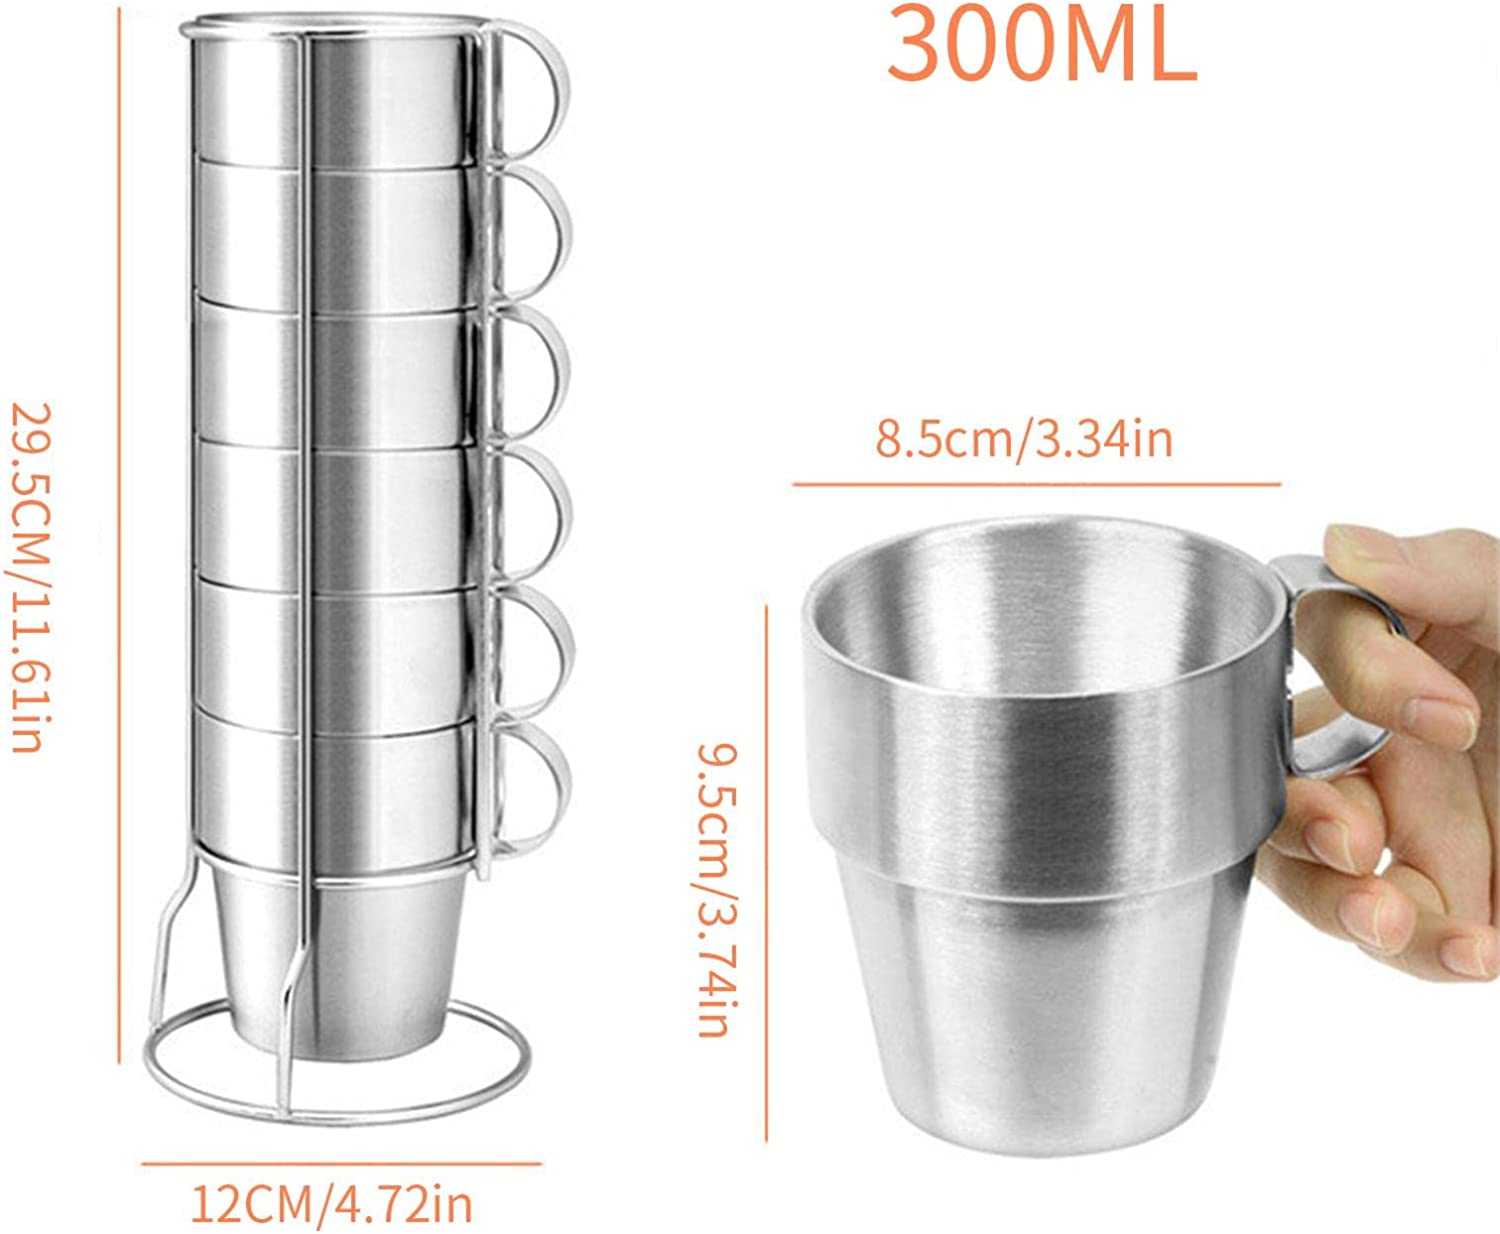 300ml Double Insulated Stainless Steel Camping Coffee Mugs